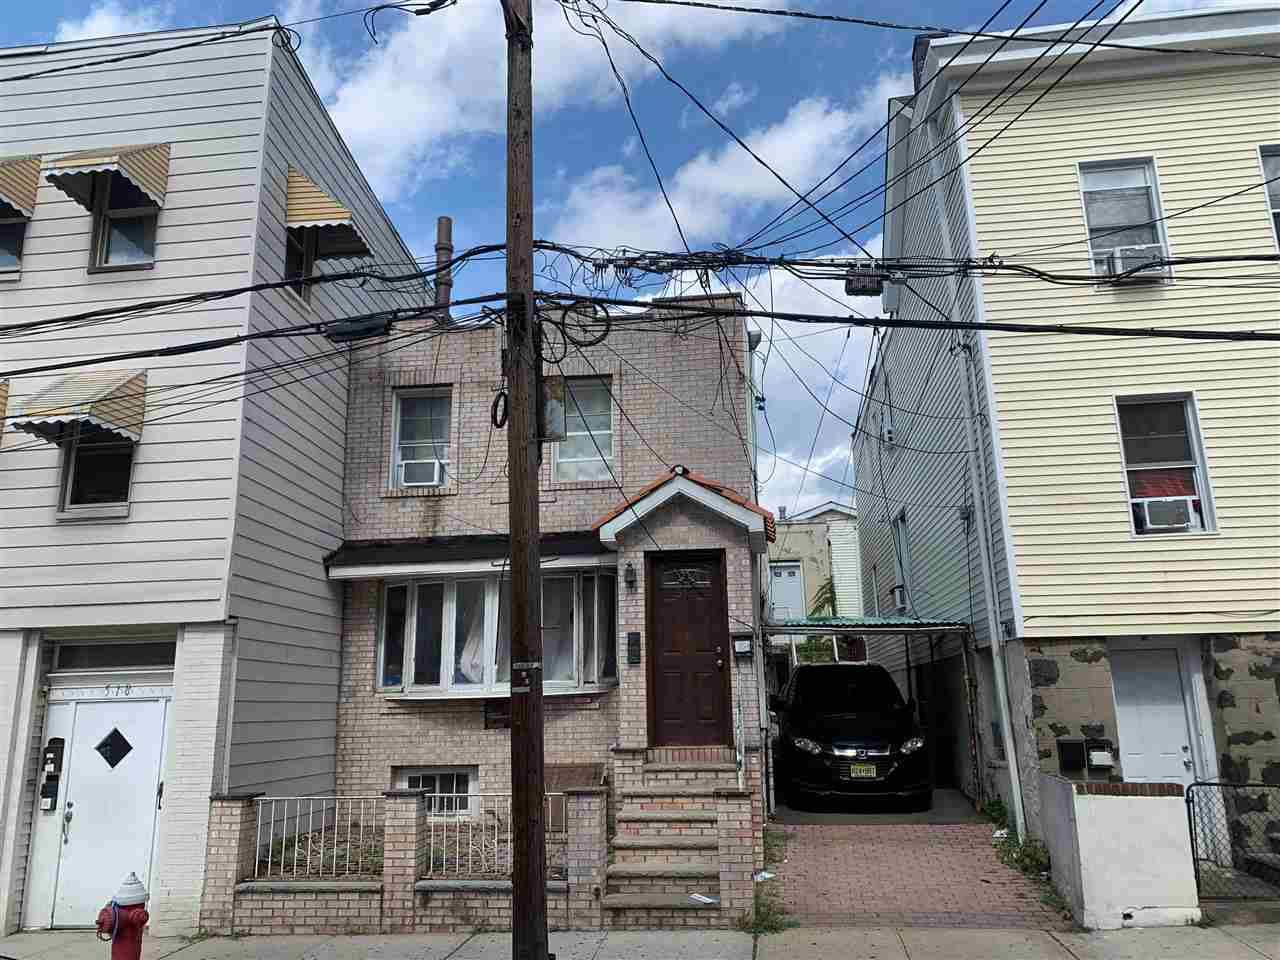 516 LINCOLN ST Multi-Family New Jersey